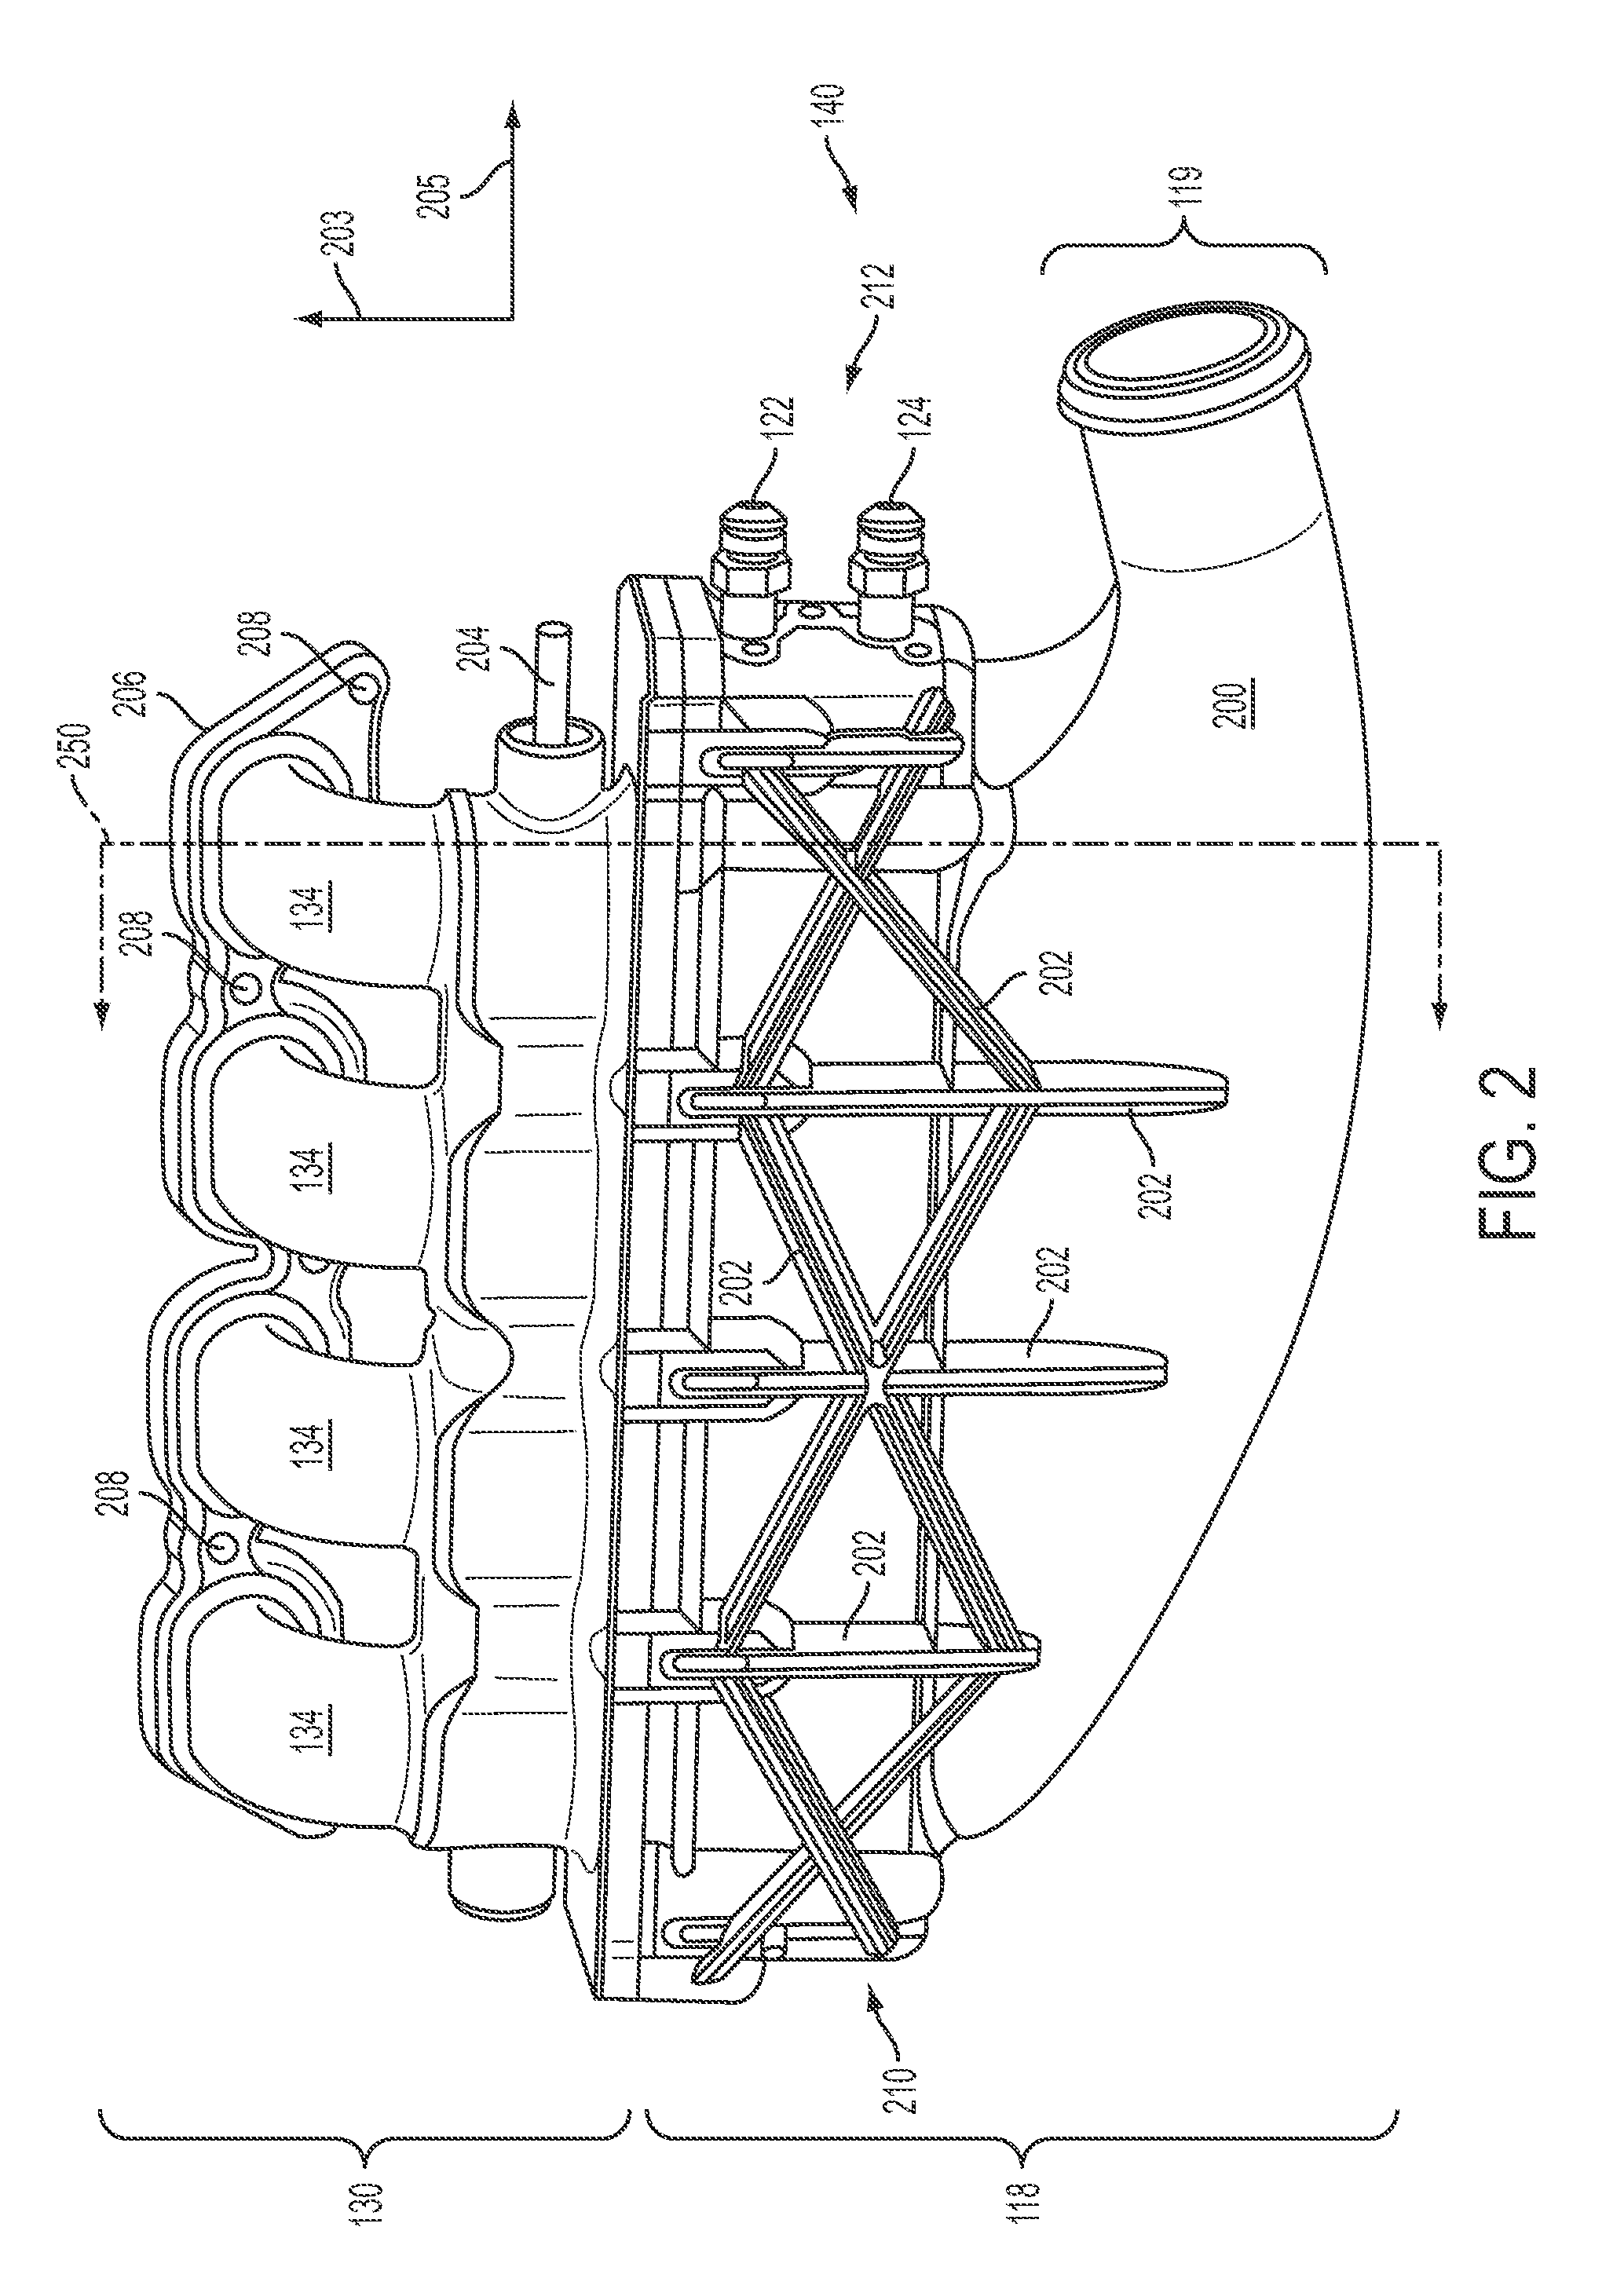 Intake system with an integrated charge air cooler